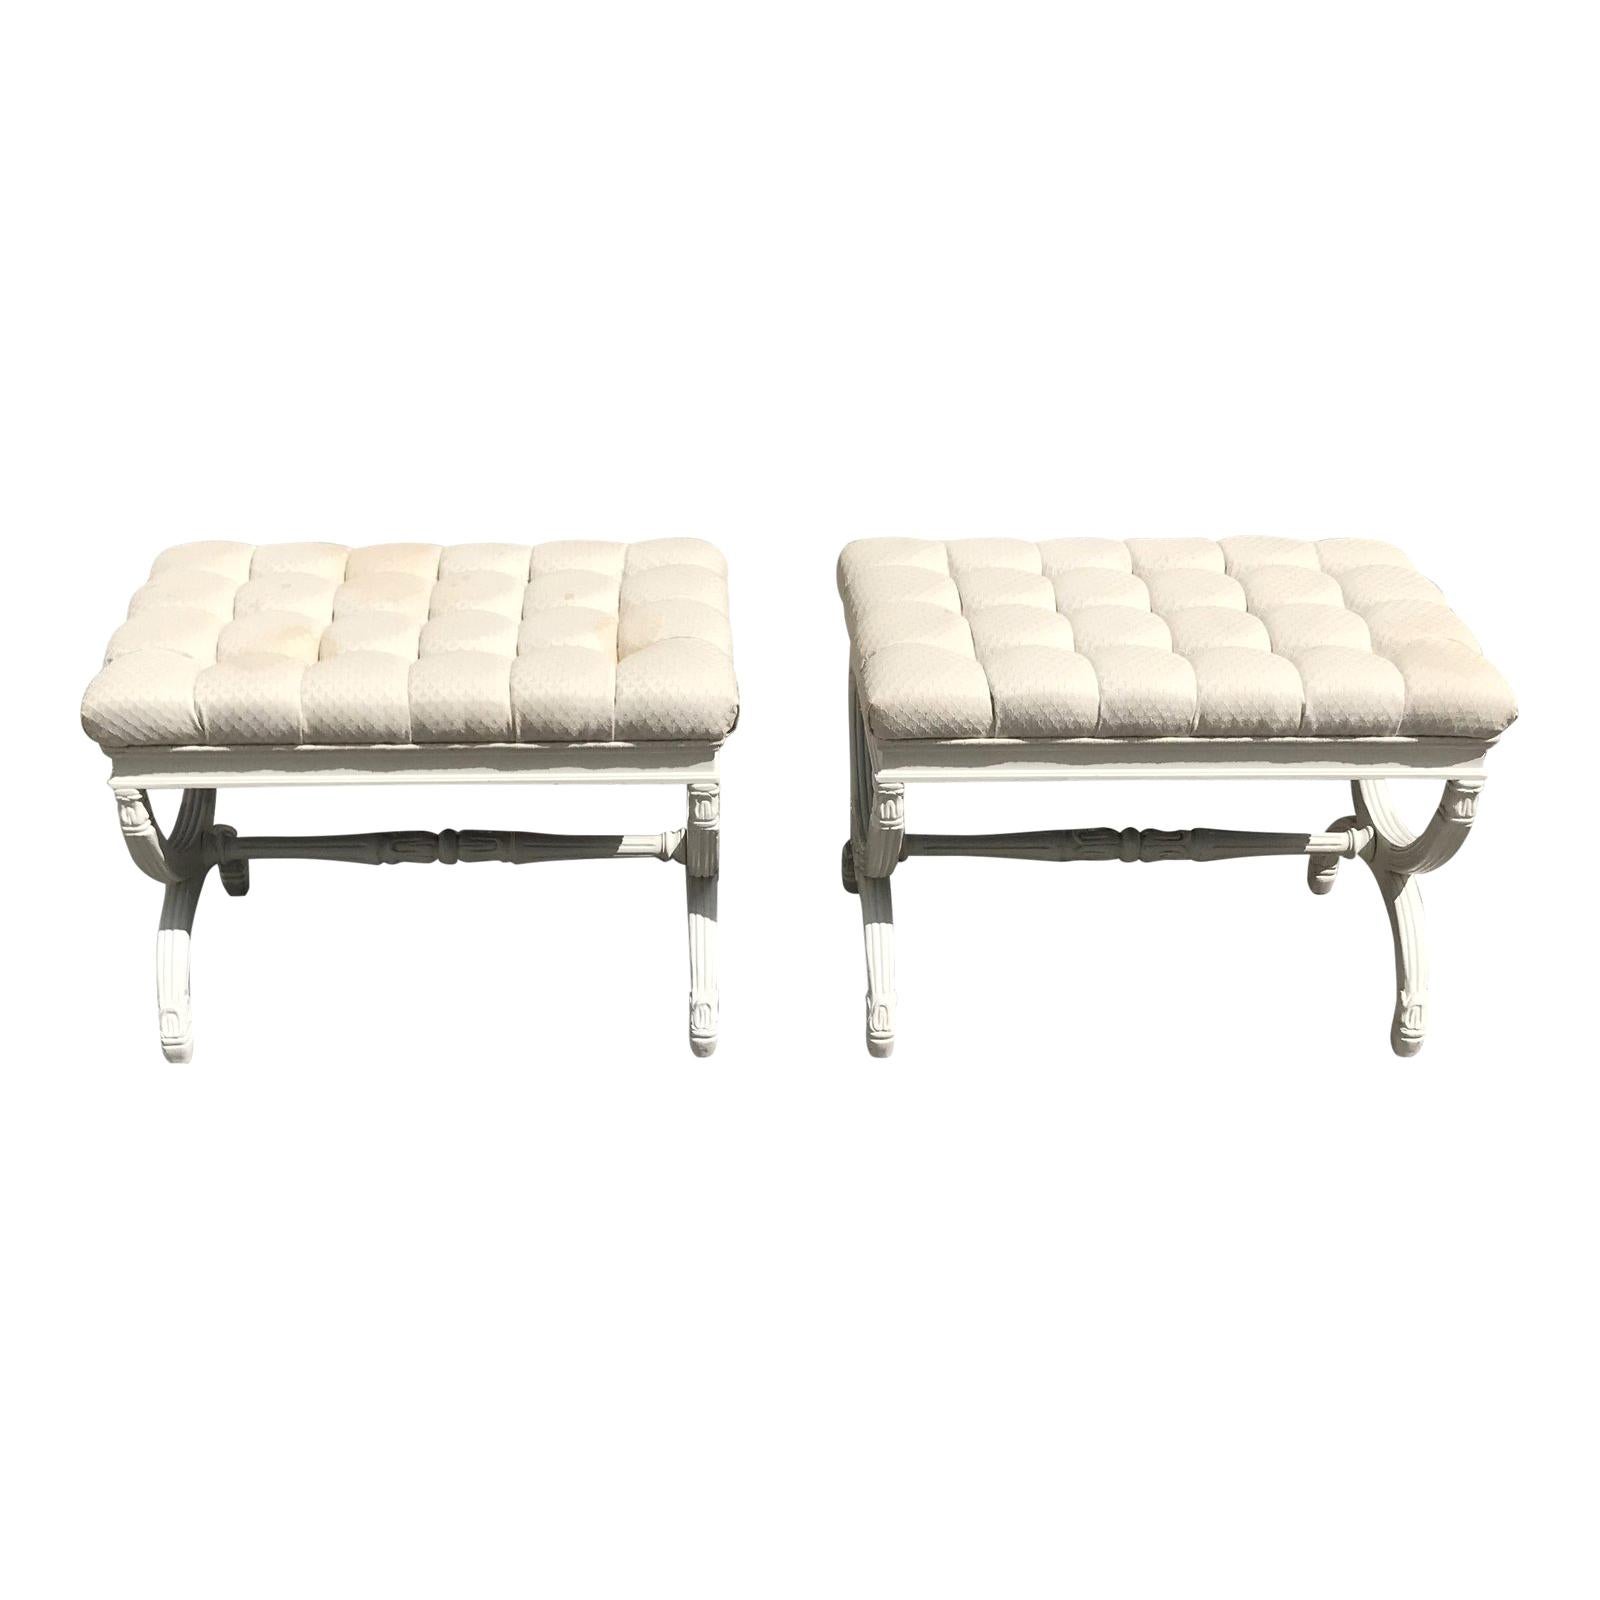 Fine Pair of French Louis XVI Barrel Legs Seating Benches 1900s 